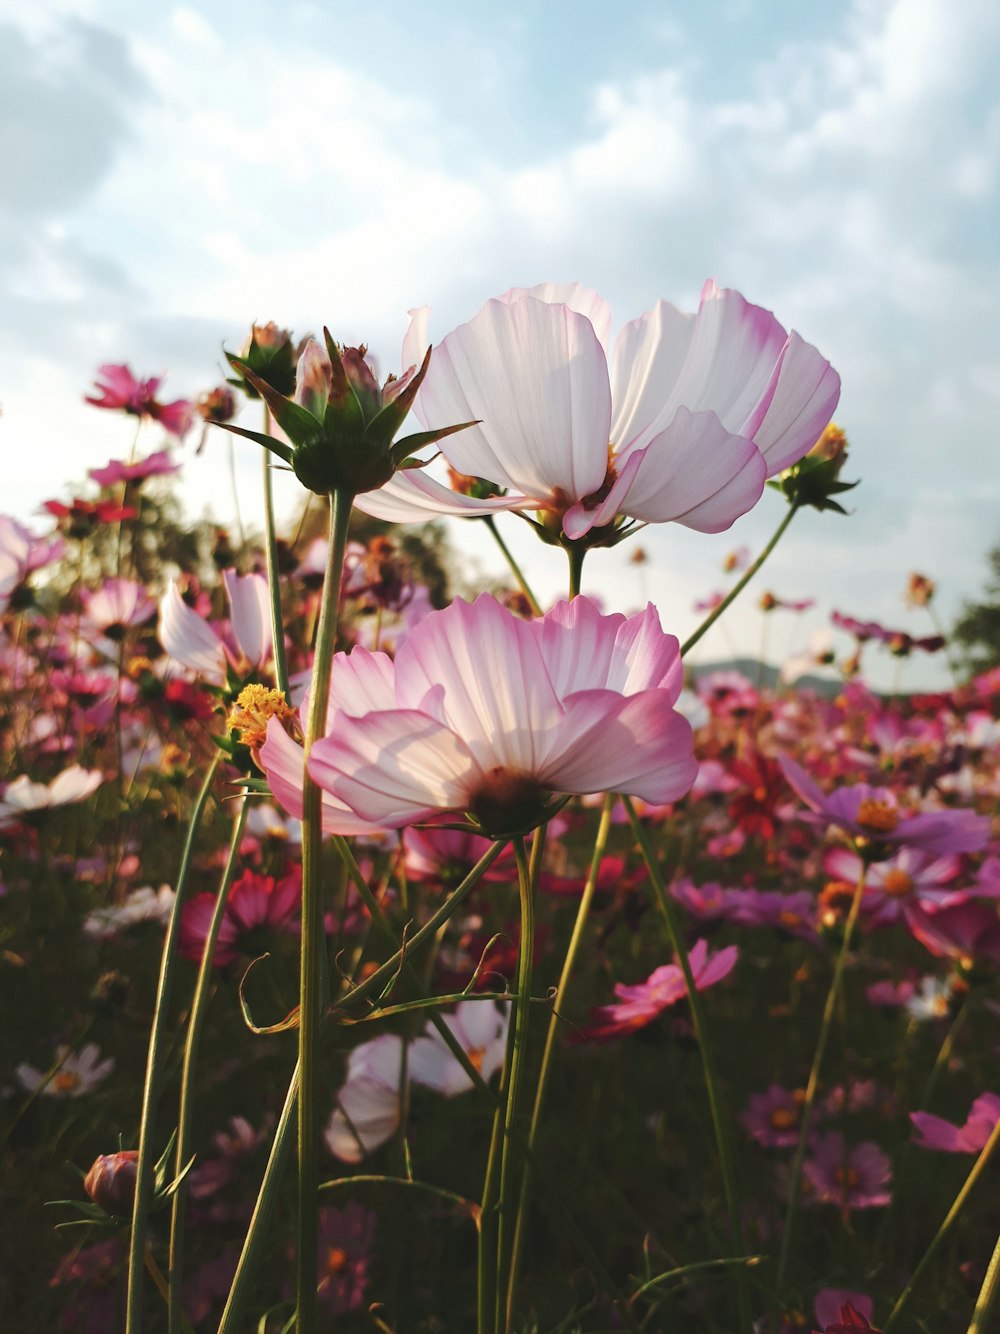 selective focus photography of pink petaled flowers under cloudy sky during daytime